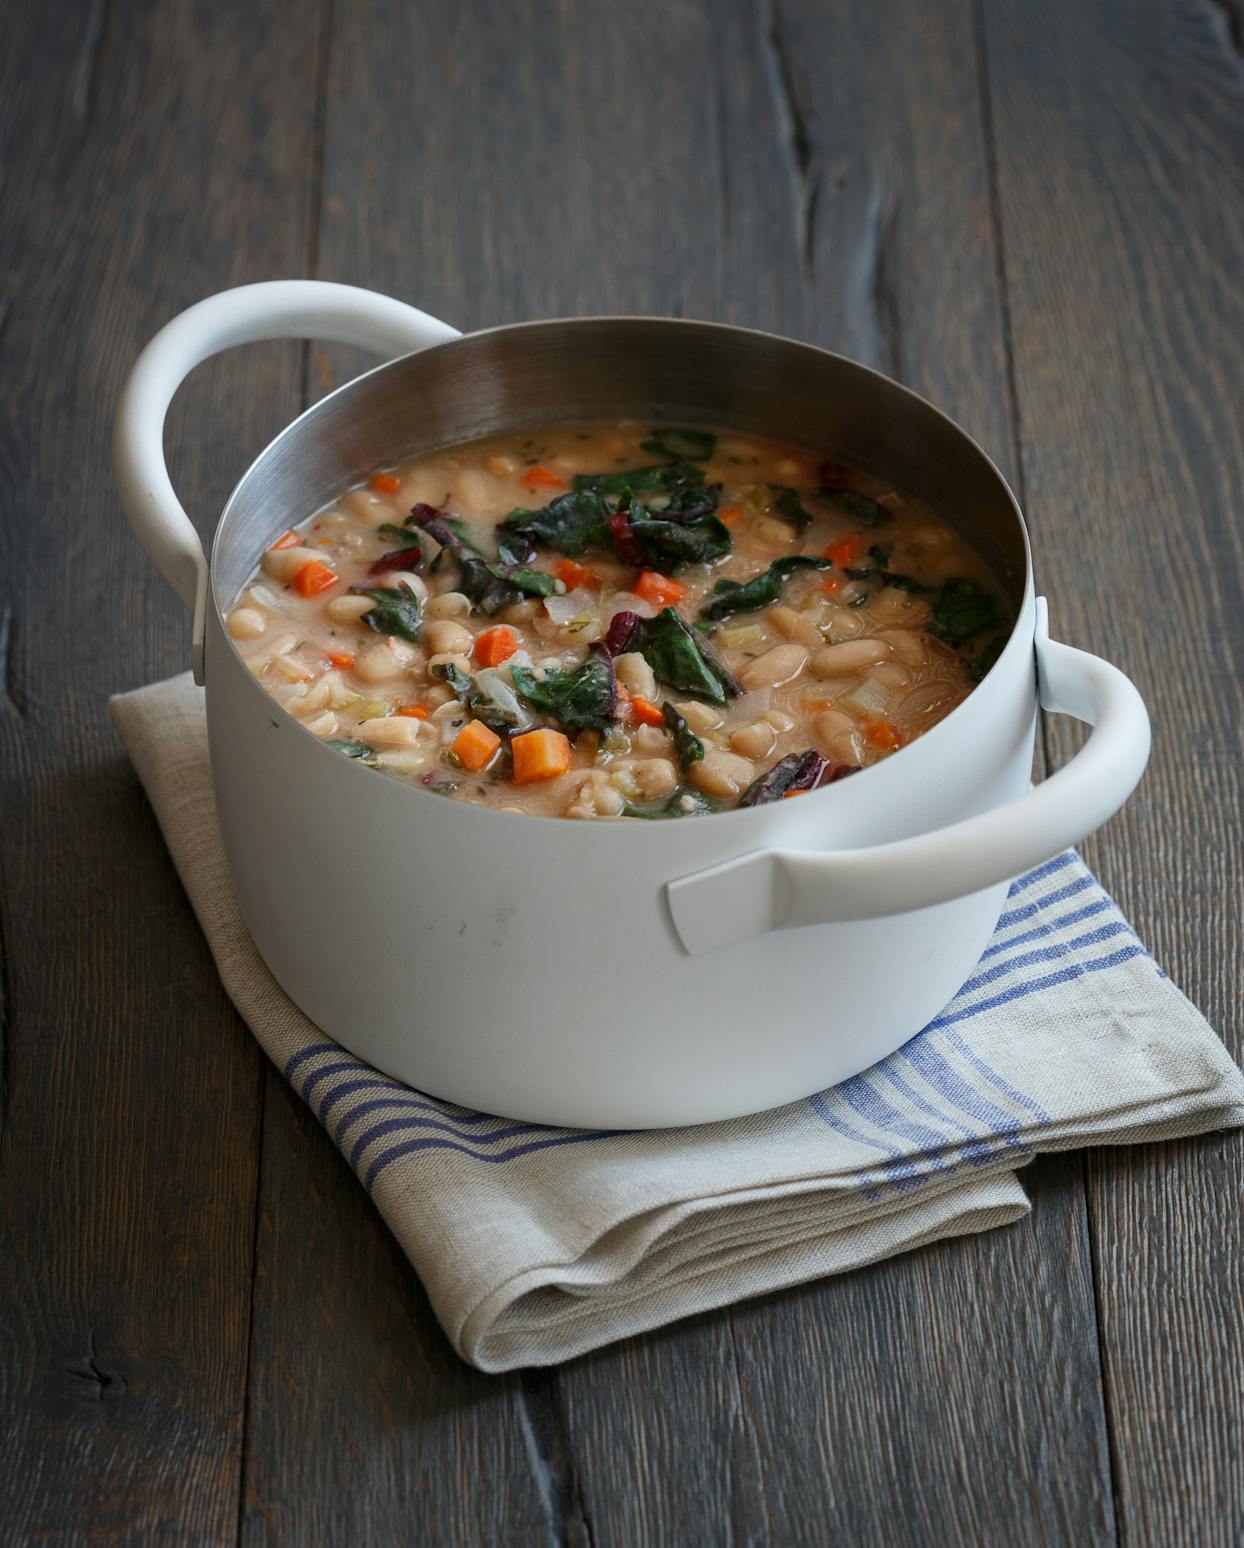 Best Tuscan White Bean Soup with Swiss Chard Recipe - The Yellow Table